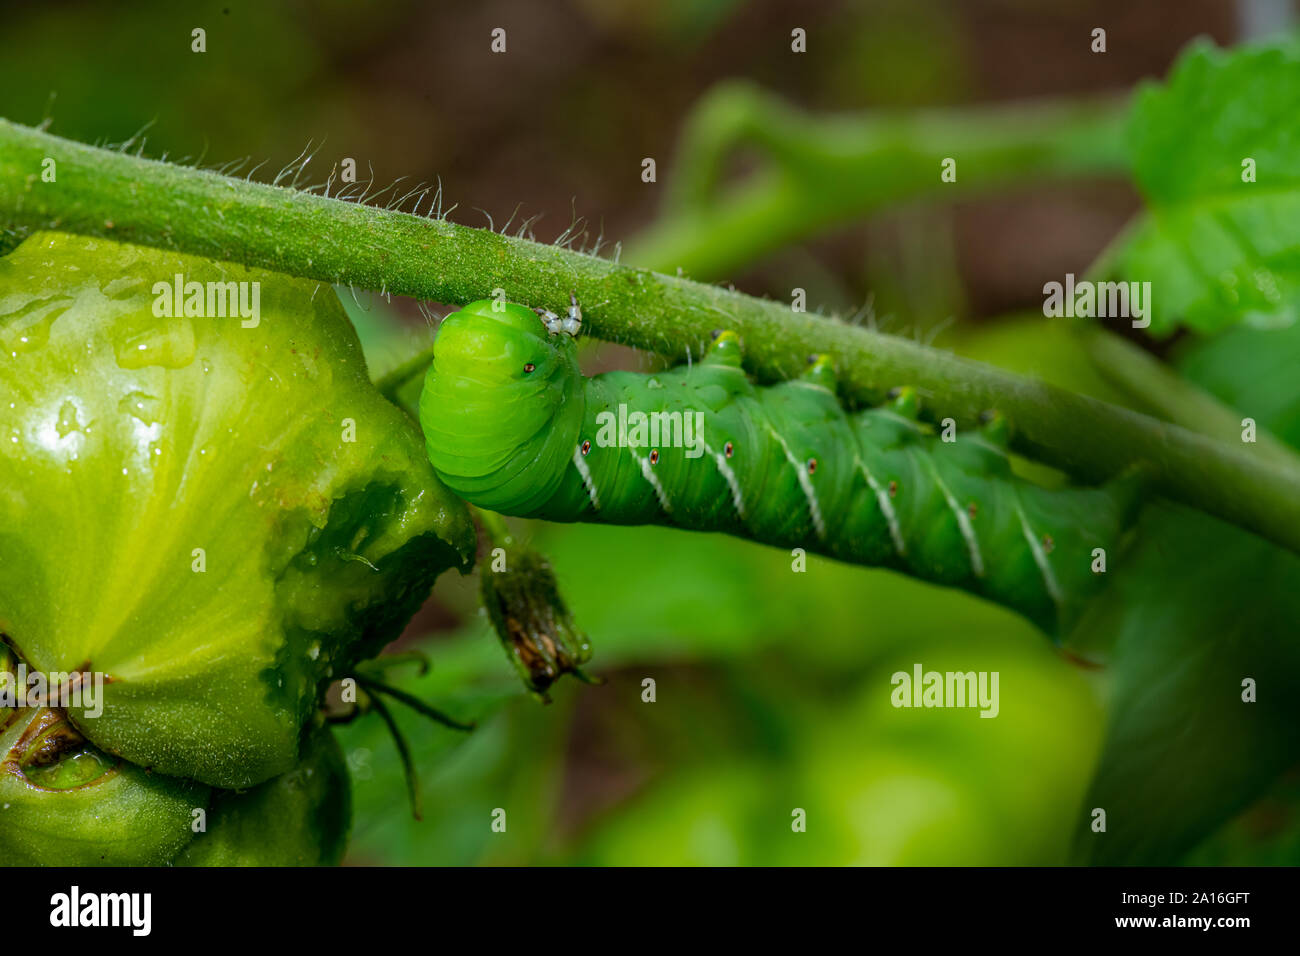 Late instar larva of Manduca sexta, the tobacco hornworm (often mistaken for a Tomato Hornworm) on a tomato plant. Stock Photo